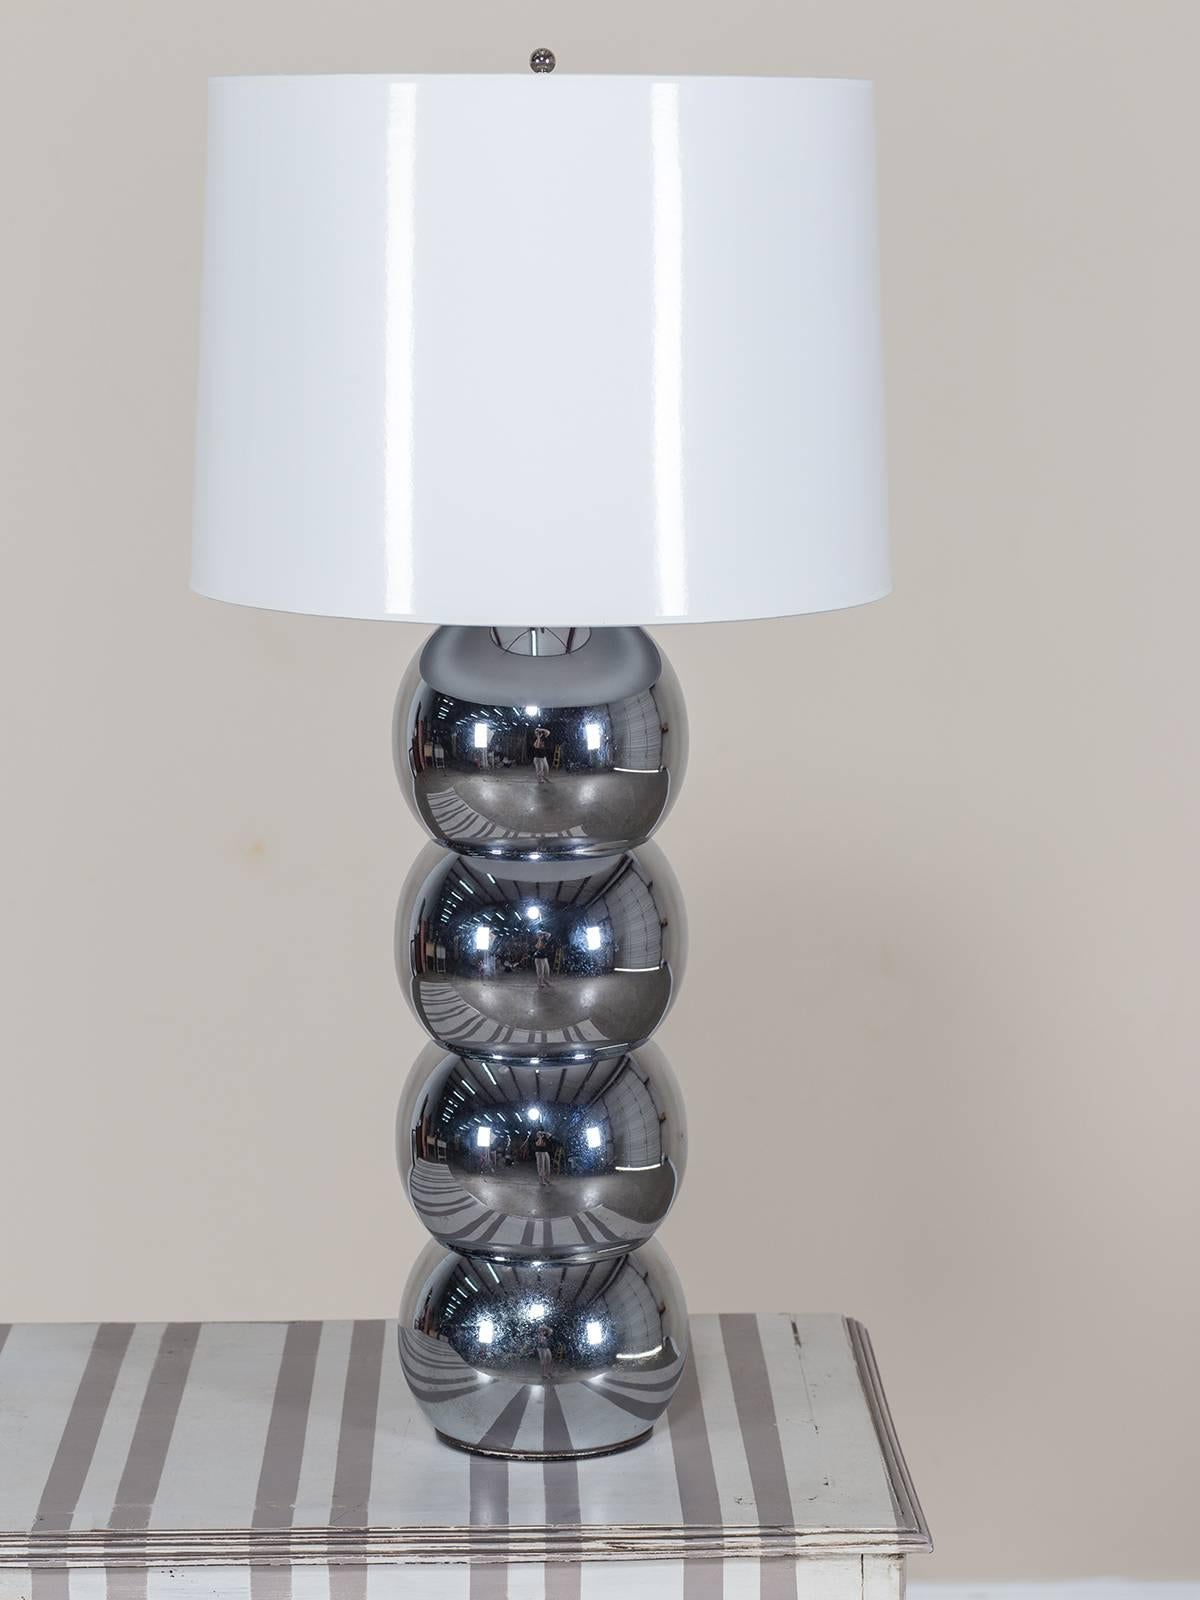 Receive our new selections direct from 1stdibs by email each week. Please click Follow Dealer below and see them first!

The brilliant metallic chrome sheen of this vintage American lamp circa 1970 remains totally modern in its appearance. First